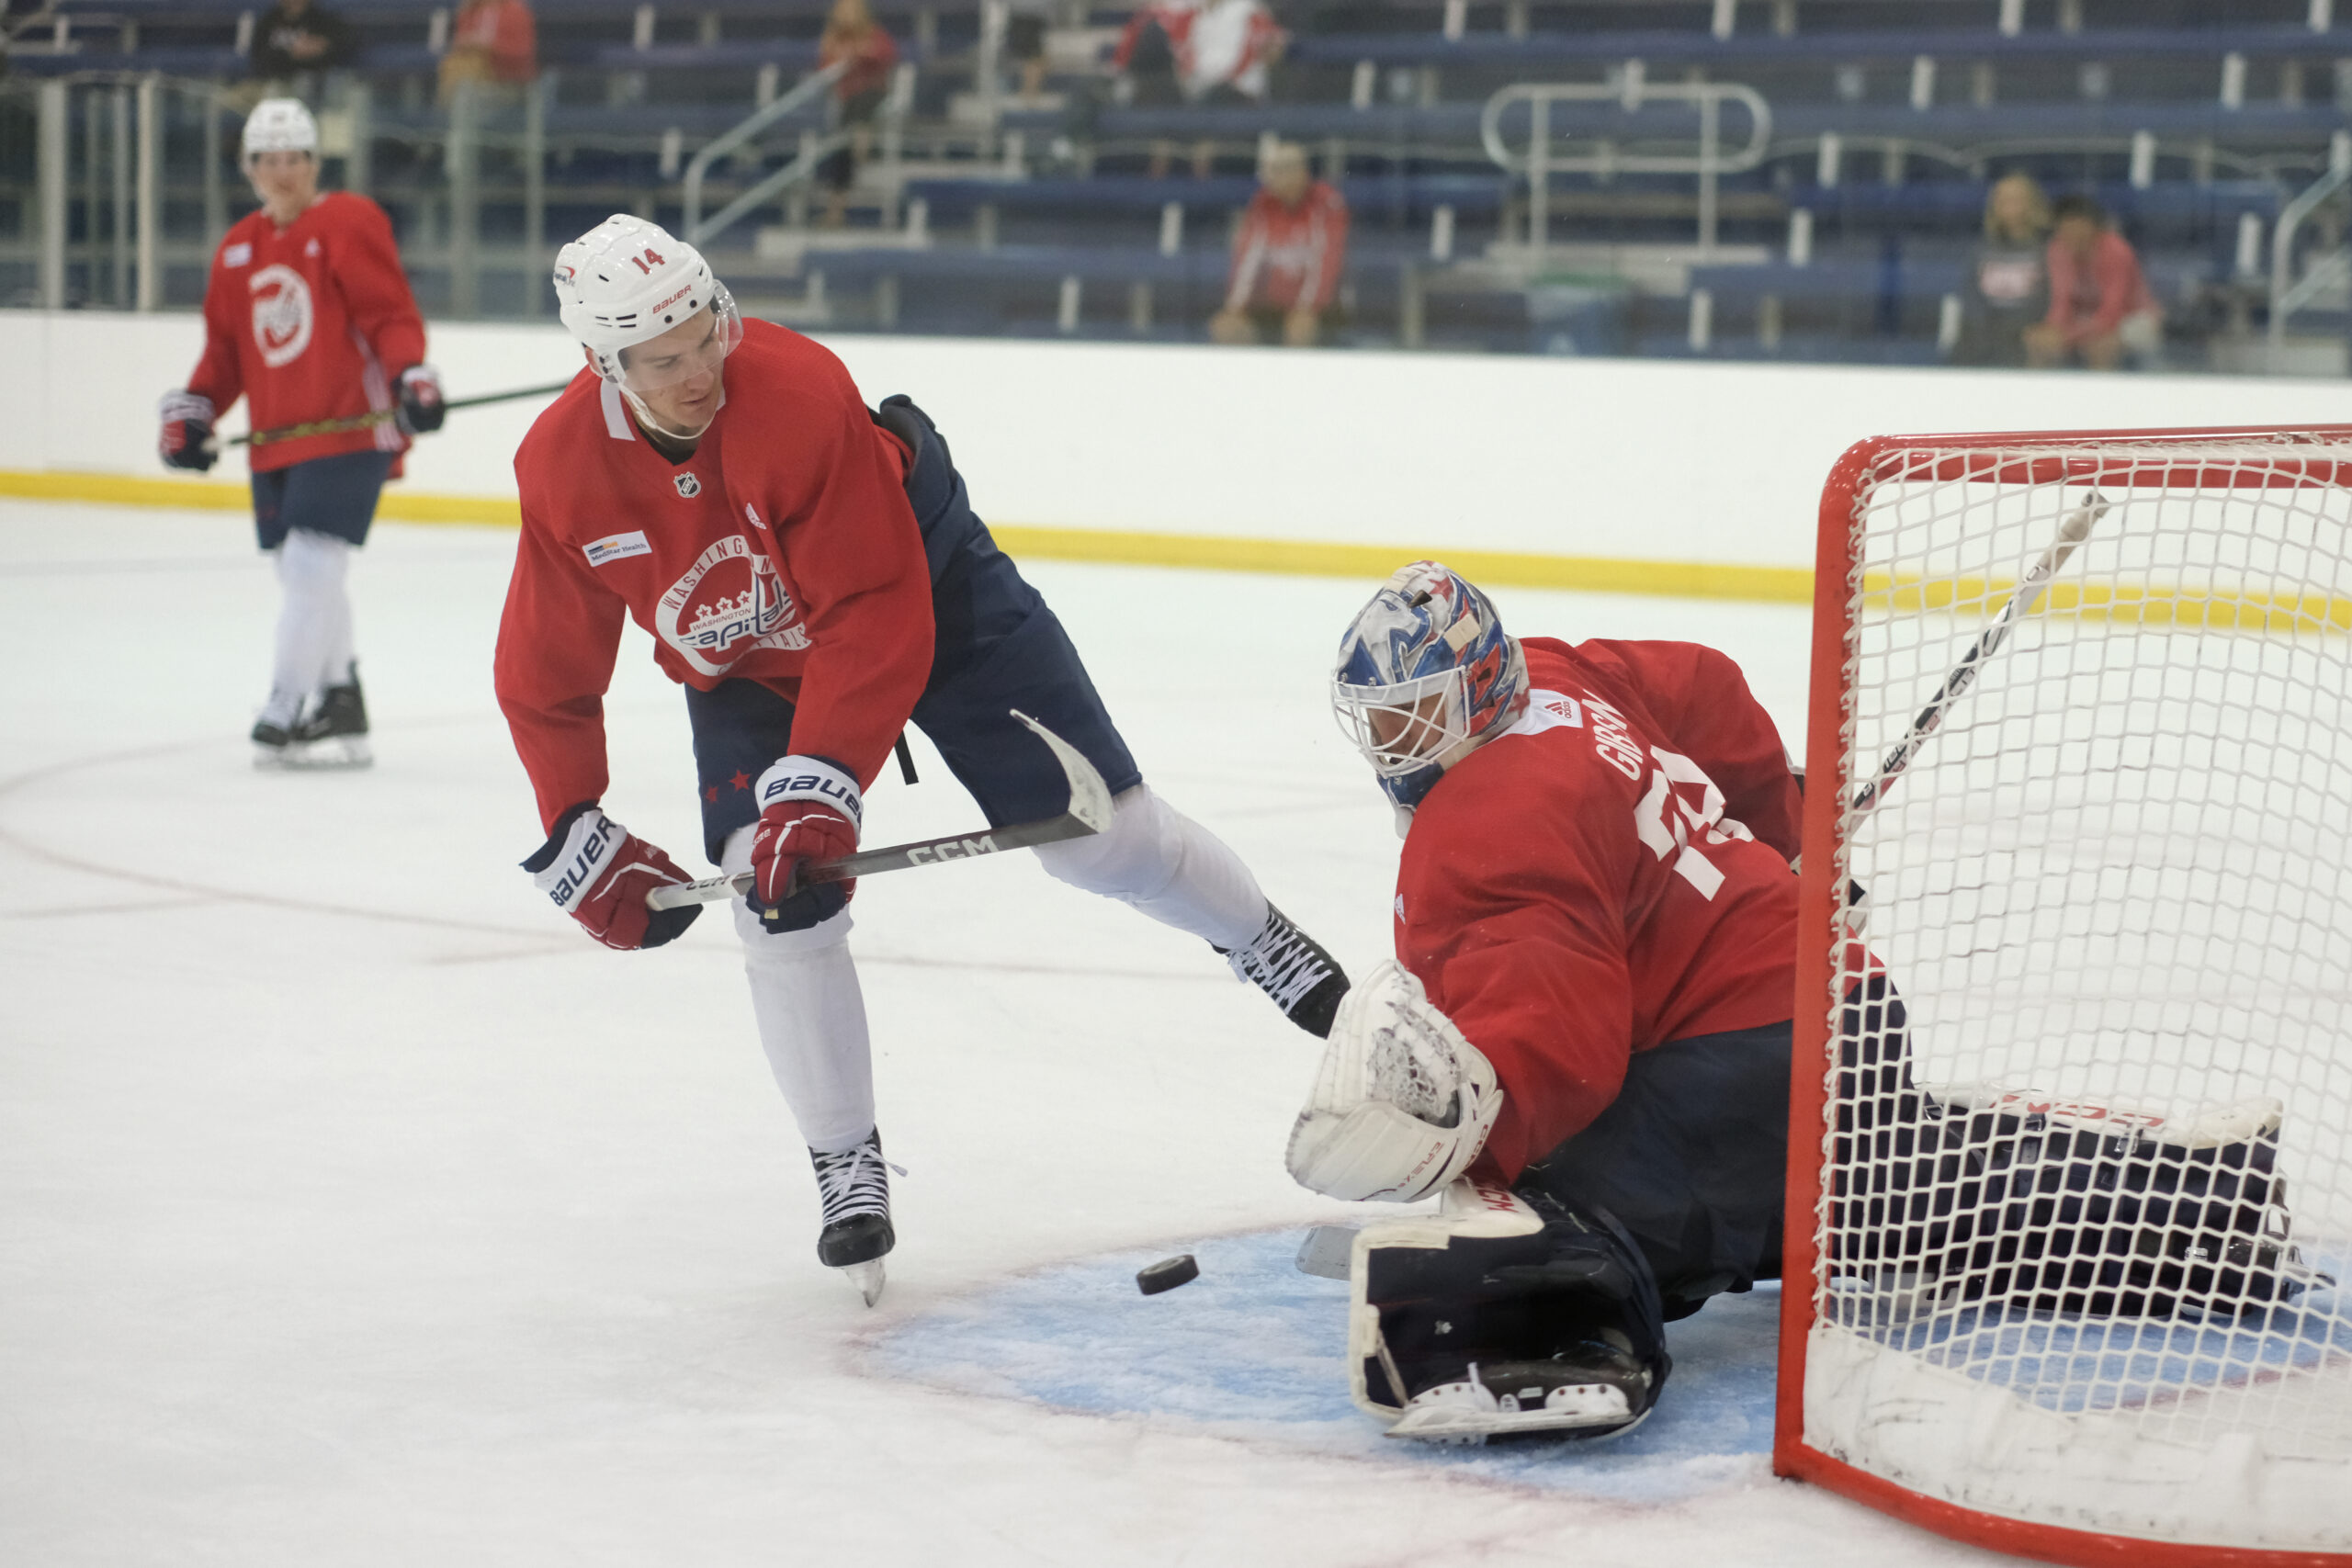 Capitals Practice At MedStar Capitals IcePlex Before Departing For